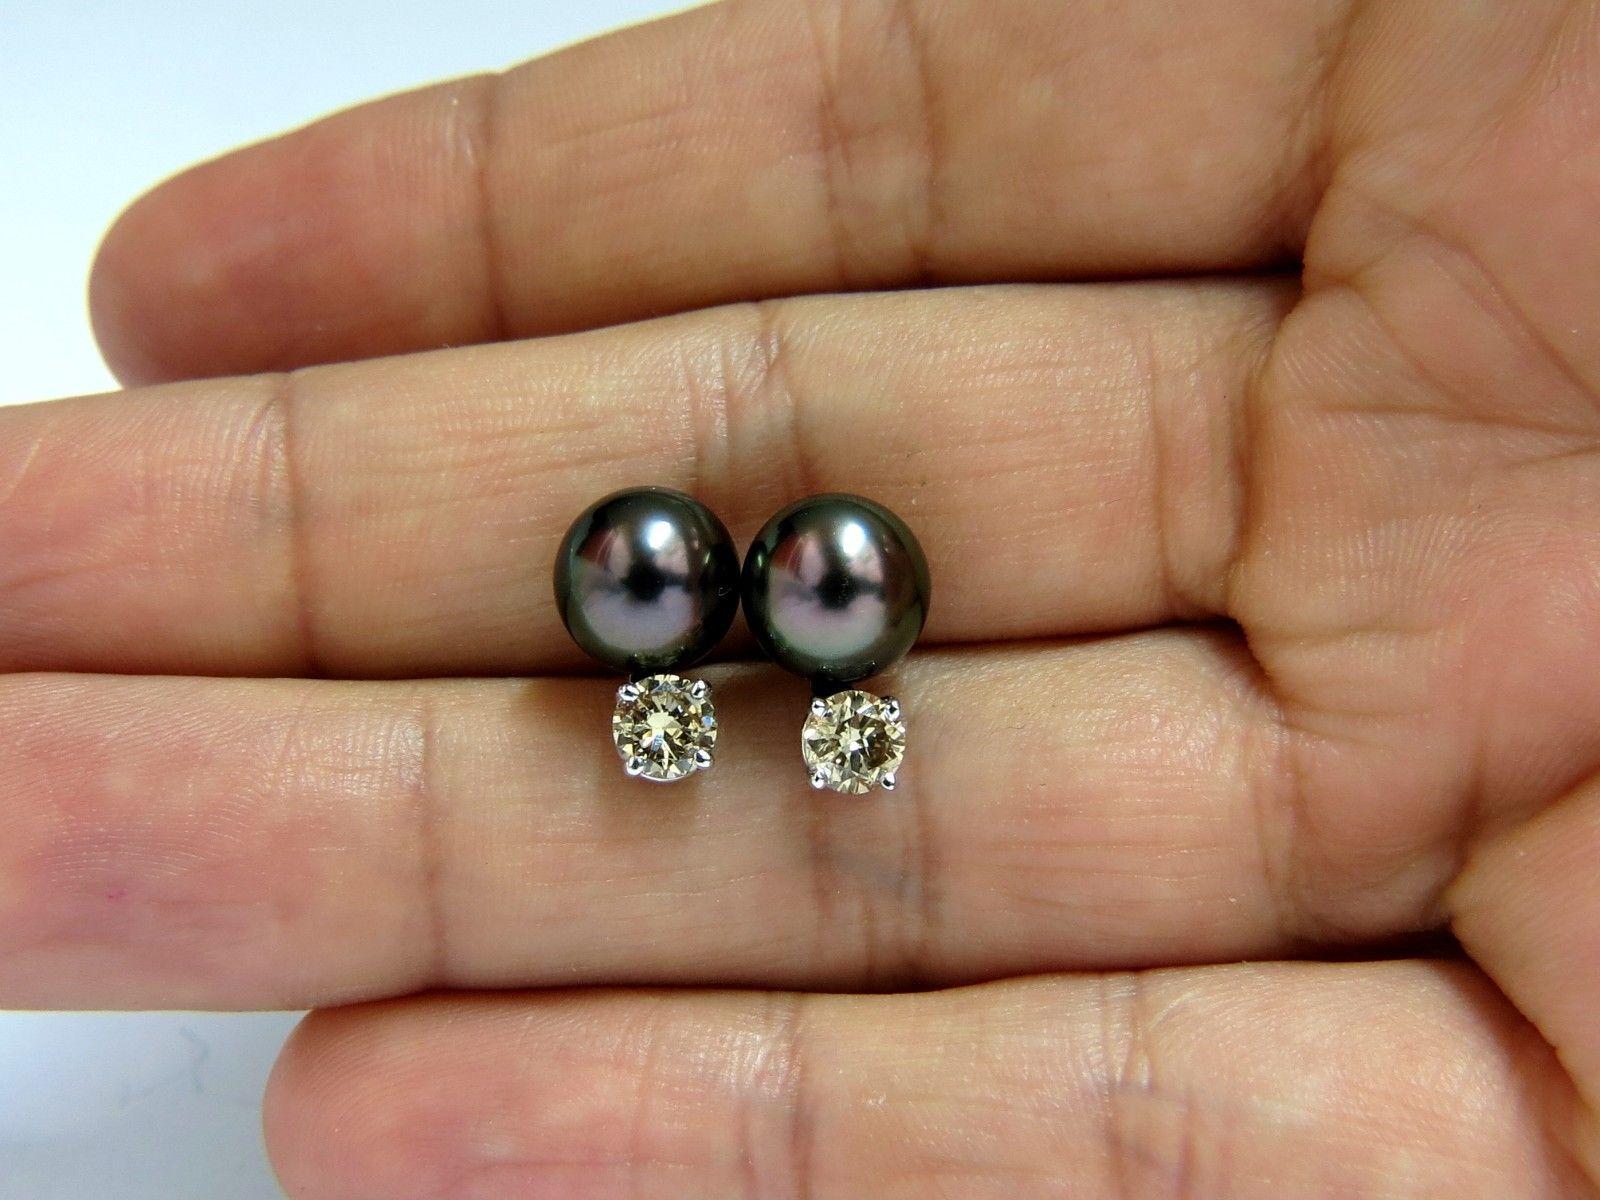 9mm Natural Tahitian Black Peacock pearls Studs

Pearls are natural, Black lipped oyster.

No pits, nicks or dents of any sort.

AAA Excellent Luster

Diamonds: 1.00ct. 

Natural fancy yellow brown color.

Rounds, full cut brilliants.

14kt. white